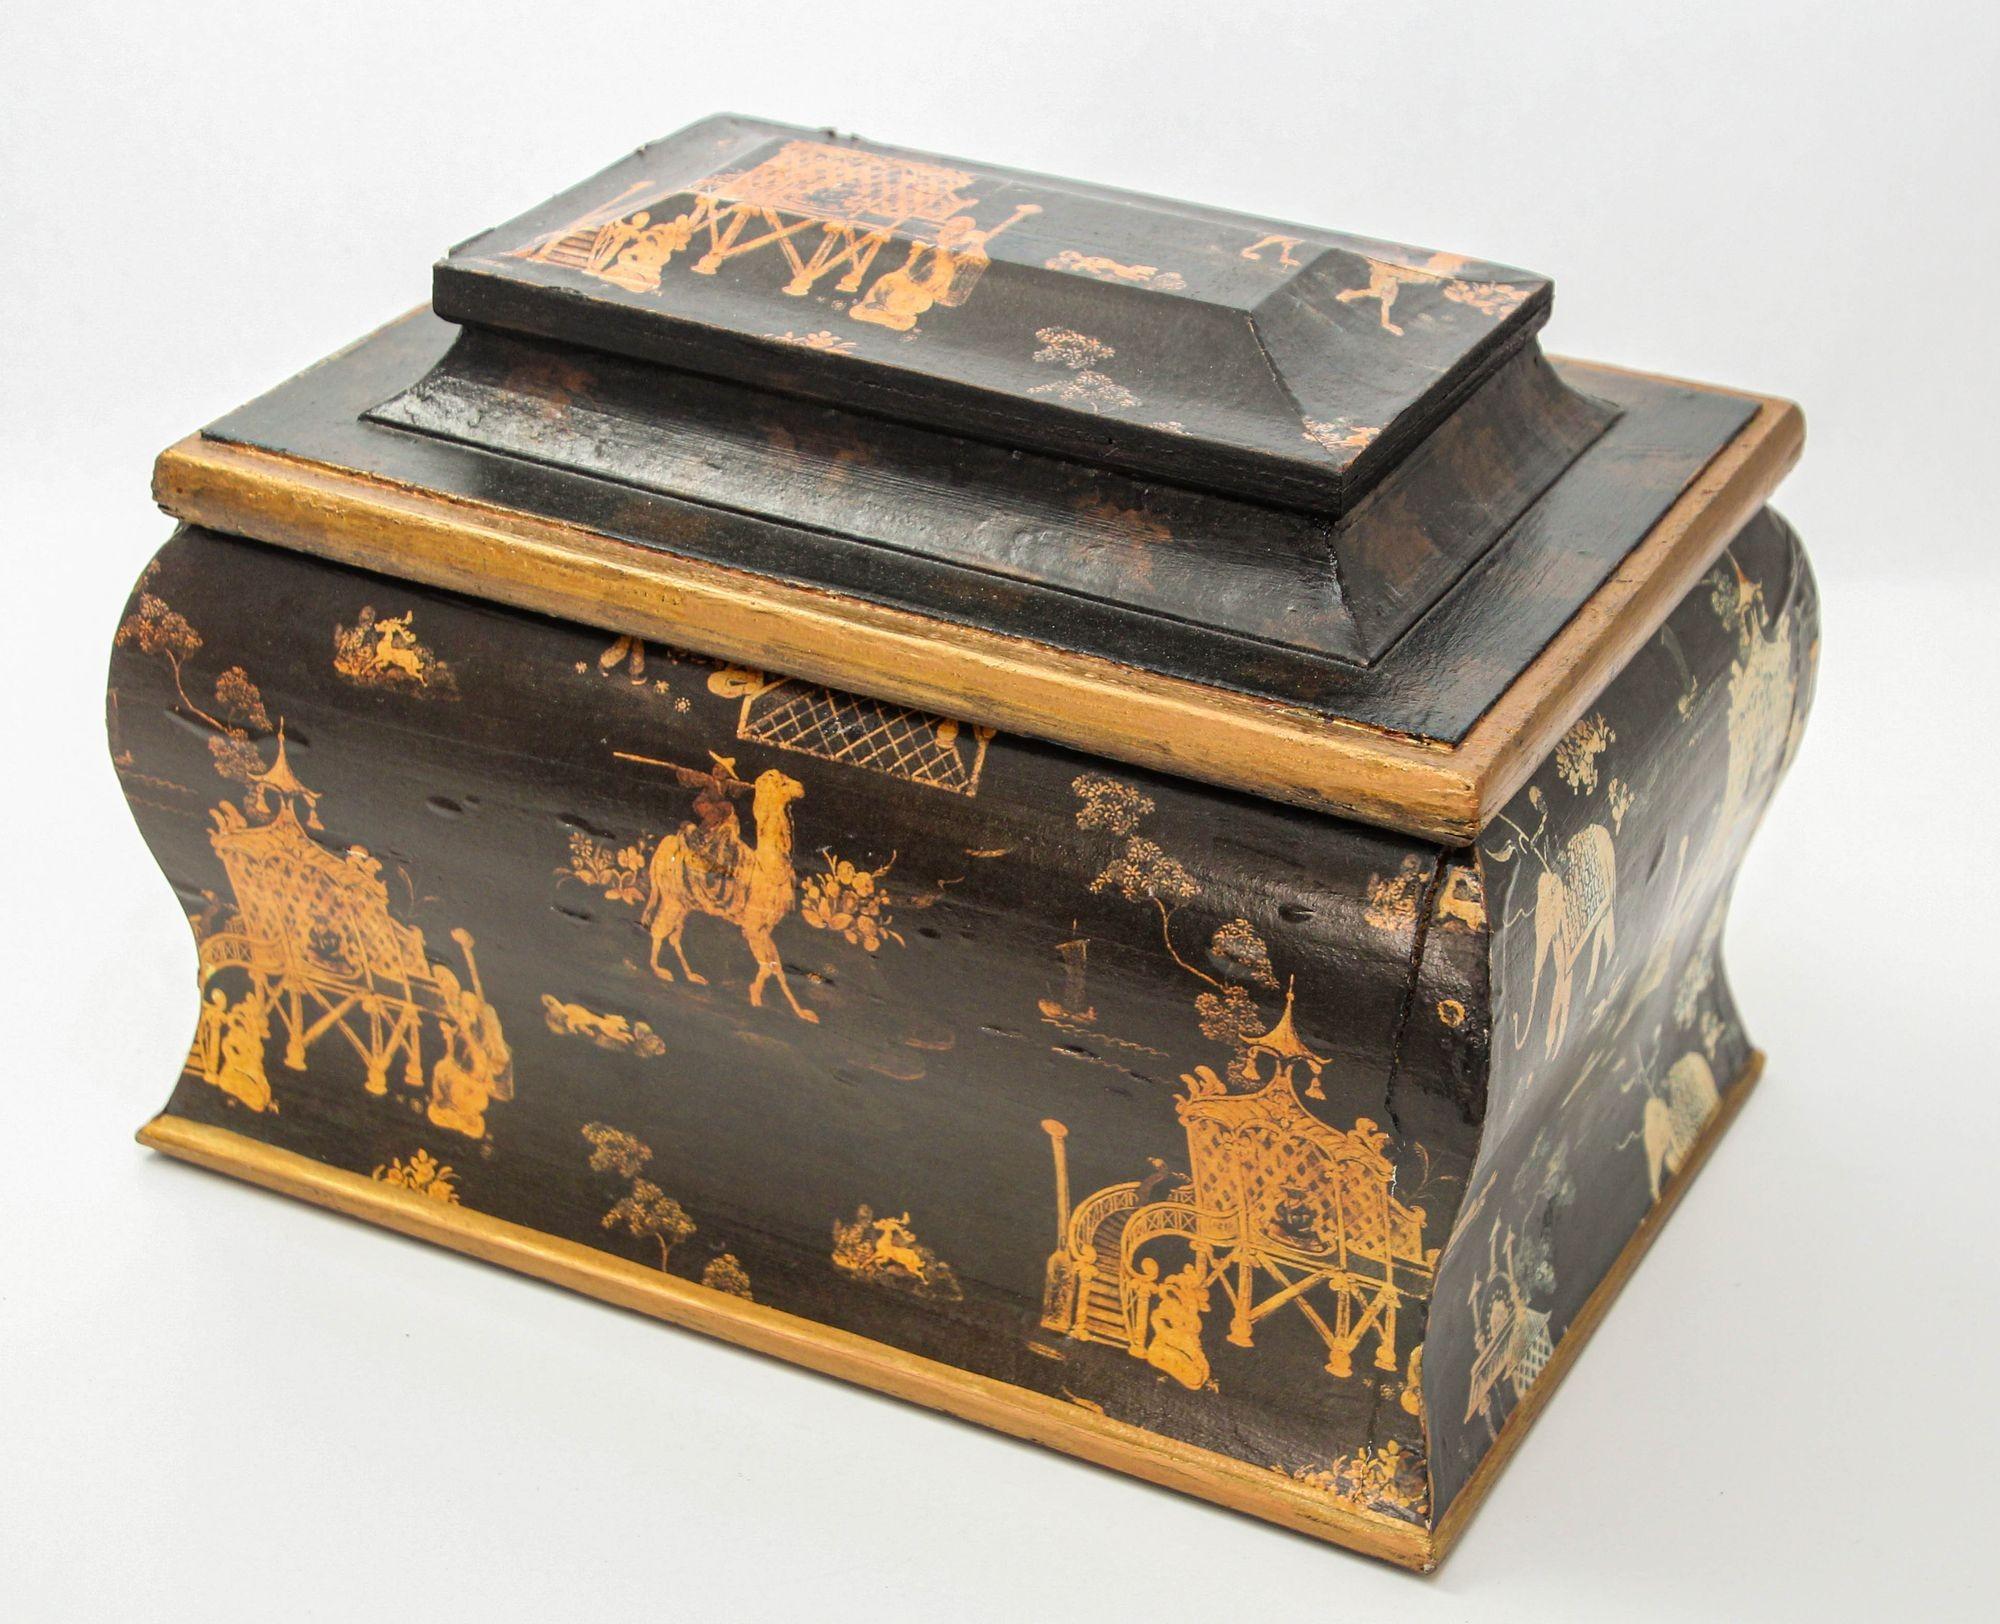 This English Regency-era jewelry box embodies Oriental aesthetics with its sleek sarcophagus shape, tapered body, and angled lid. Adorning the lid are intricate Chinoiserie scenes depicted through penwork on each faceted panel. Opening the box